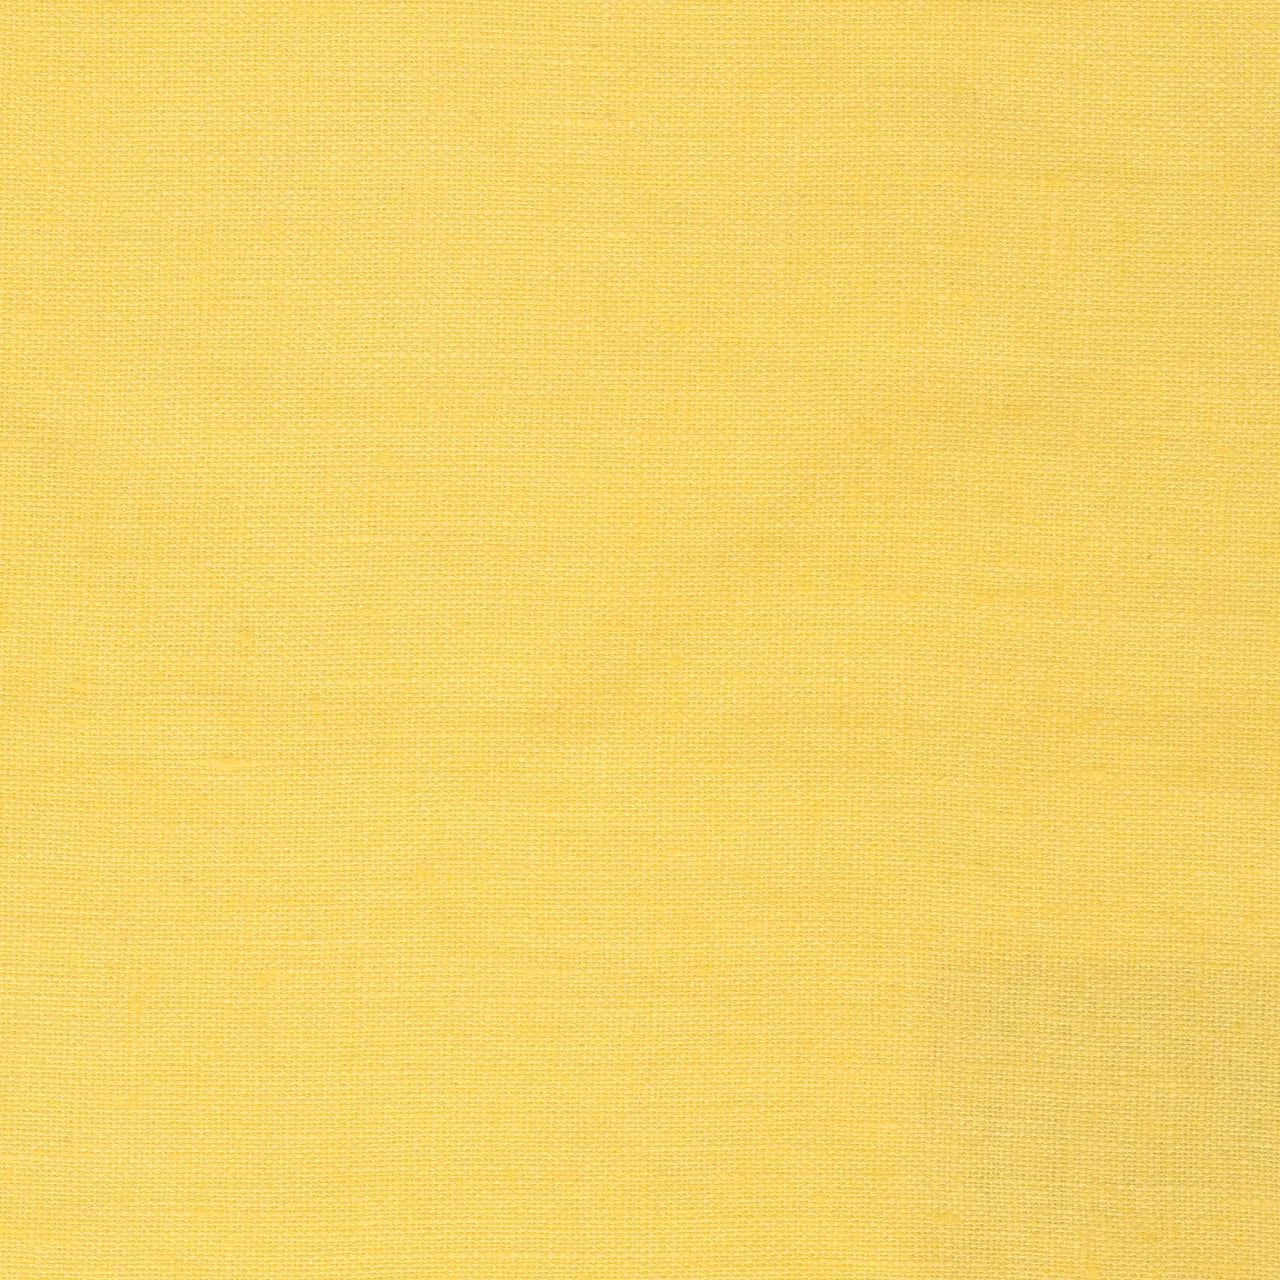 Washed Pure Pale Yellow Linen Fabric 205 g/m²